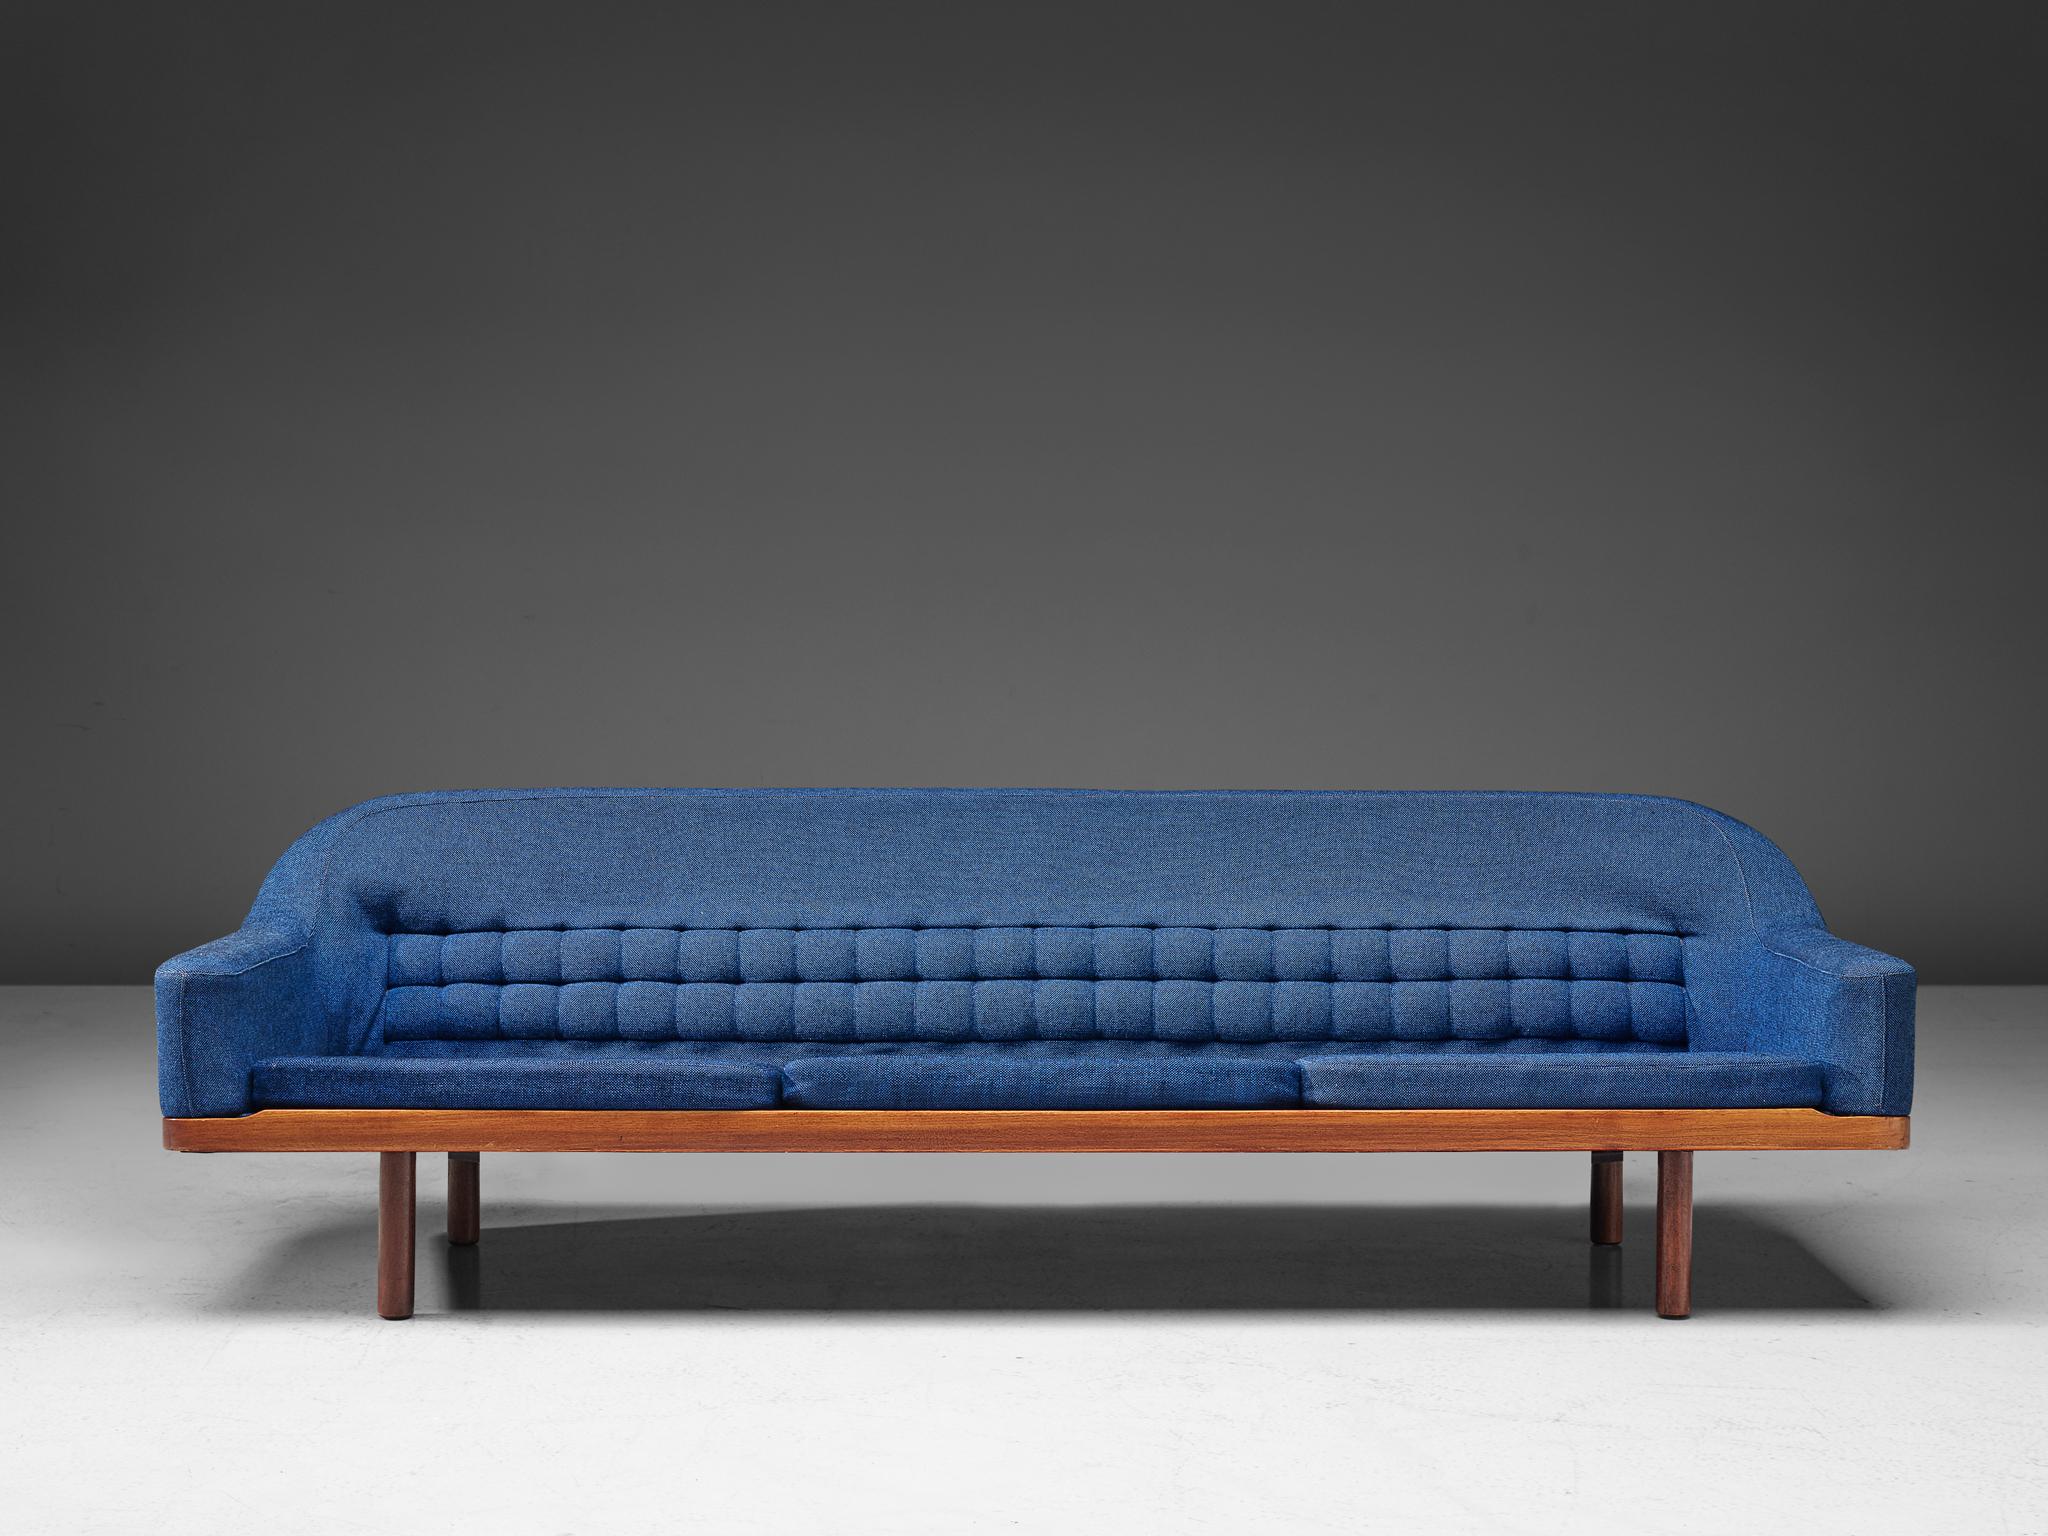 Arne Halvorsen for West Norway Factories, model 2010 sofa, teak and upholstery, Norway, 1960s.

Two large sofa's designed by Arne Halvorsen for PI Langlo, part of the West Norway Factories collaboration. The sofa is characterised by its tuffed back